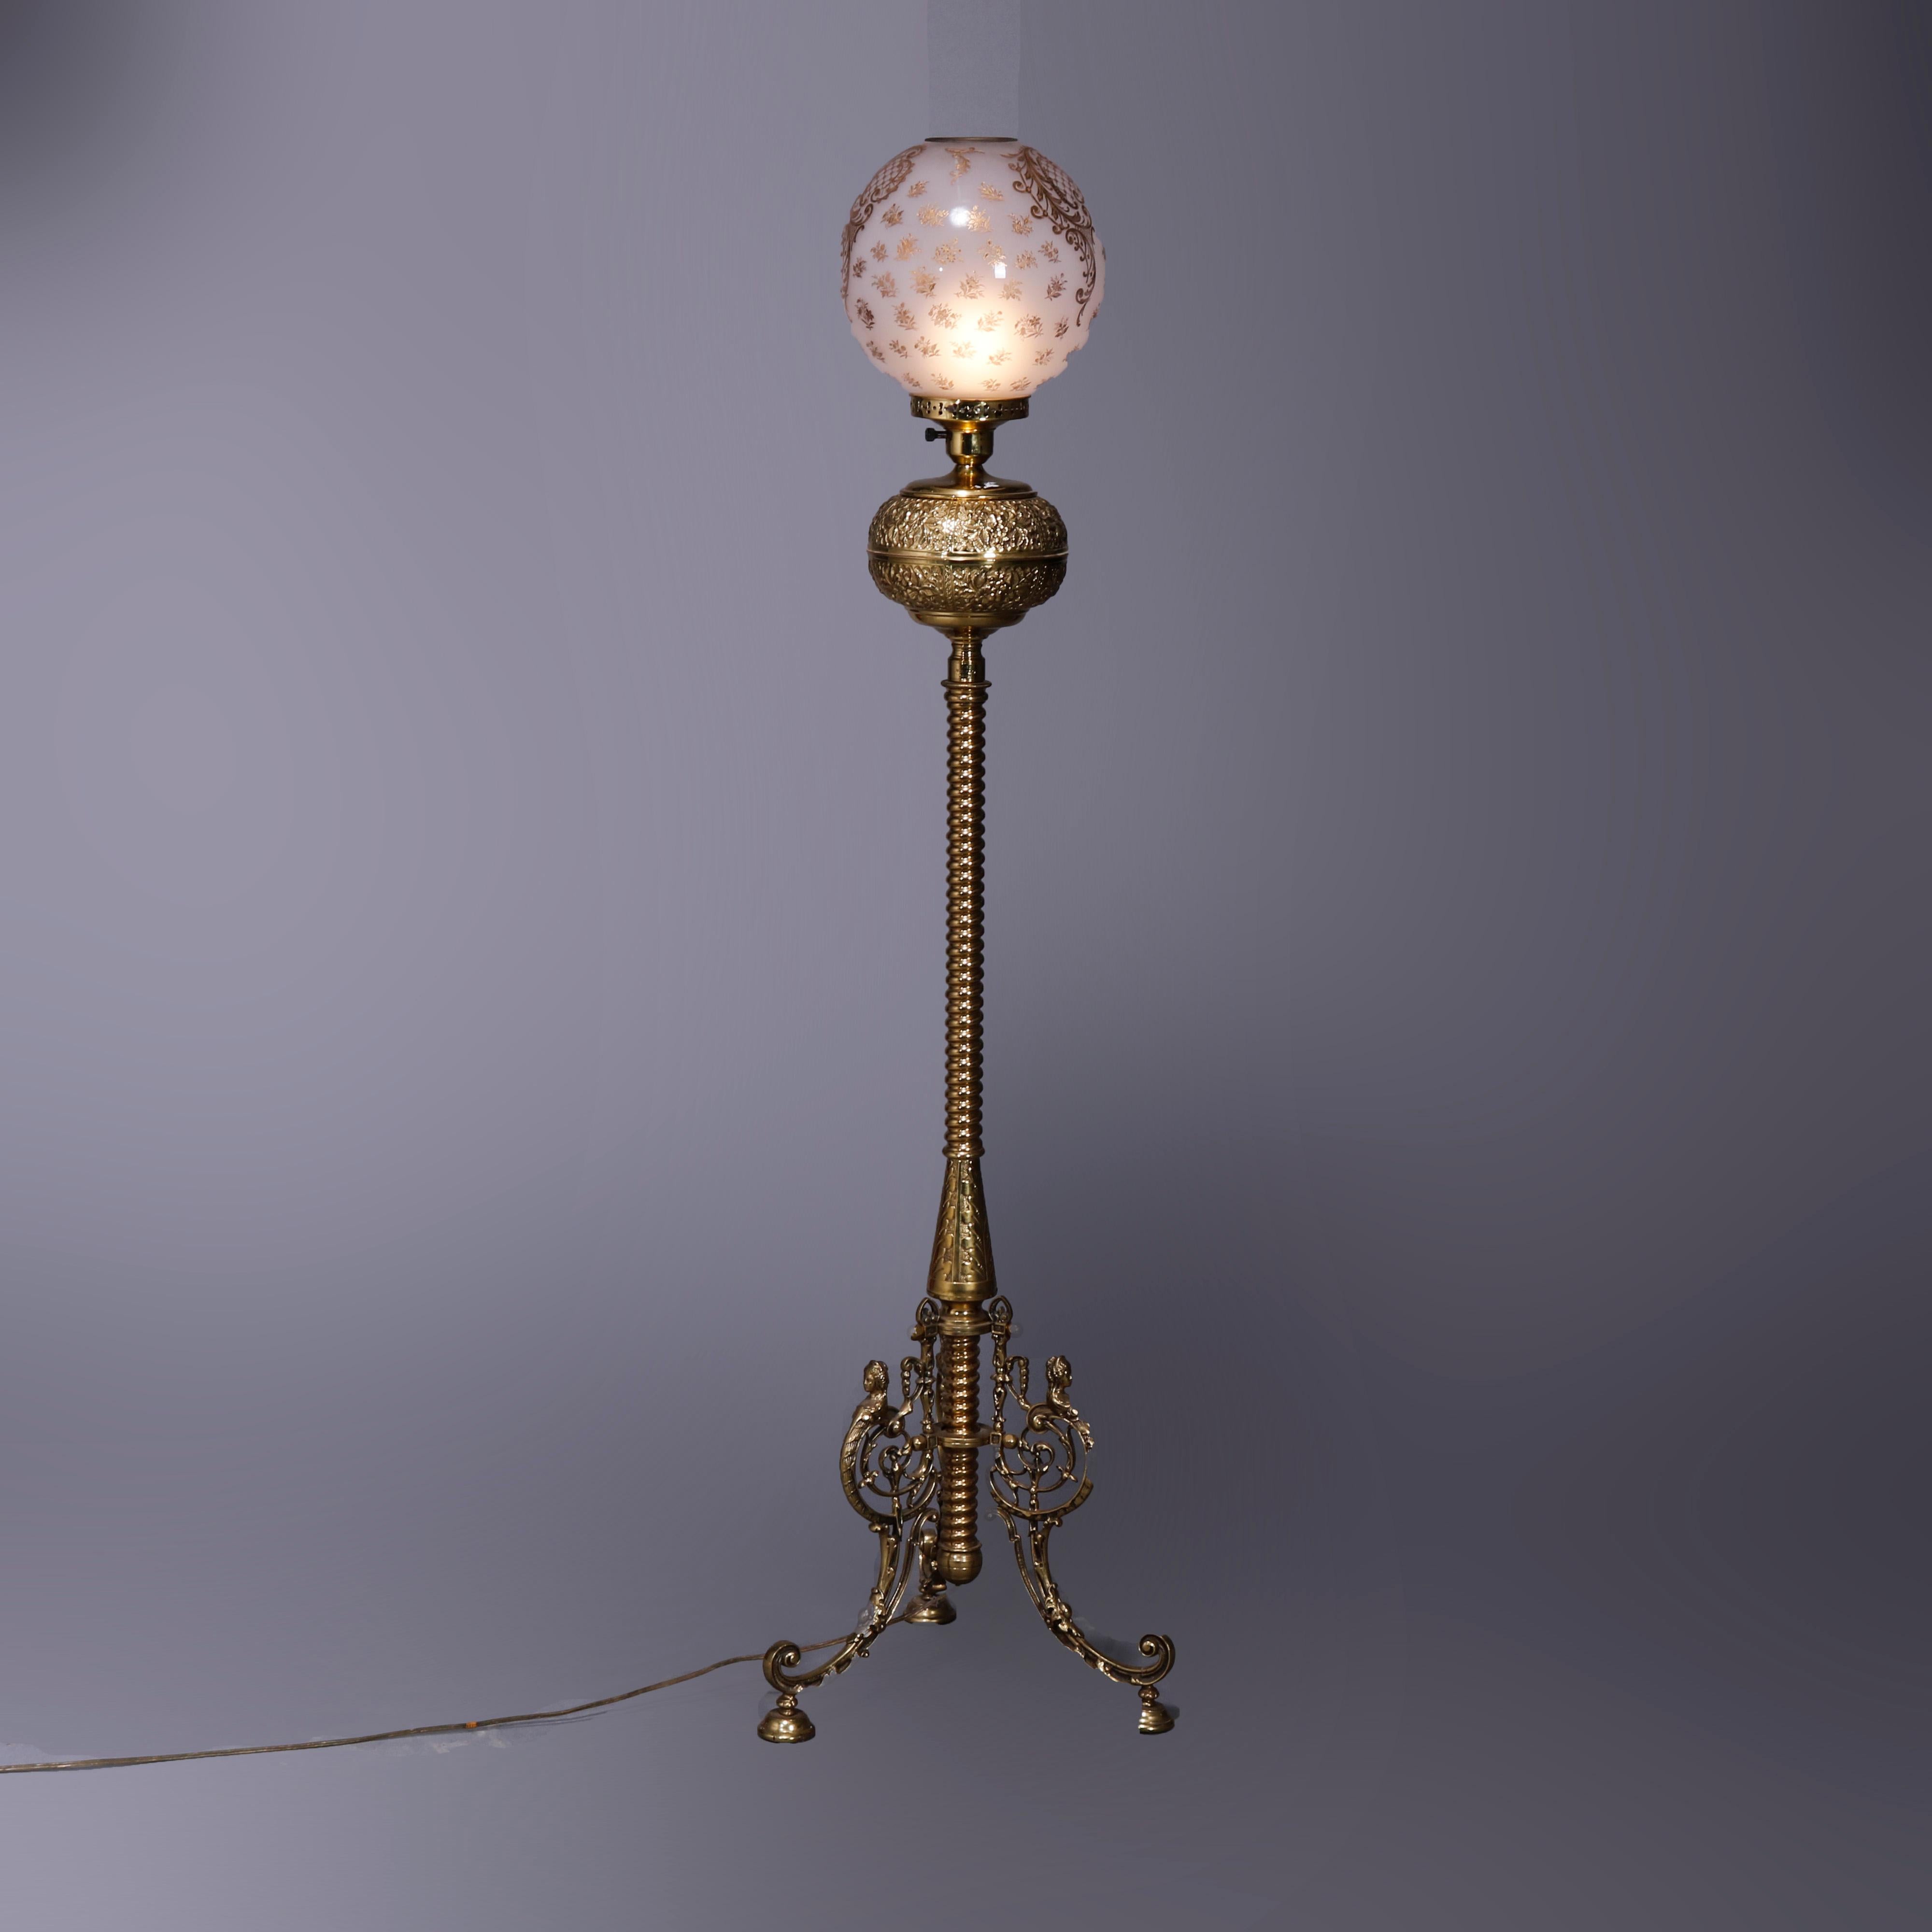 An antique Victorian piano lamp by B. Hollings & Co. offers gilt decorated glass globe shade over brass base having foliate embossed font and raised on three scrolled foliate legs, dated 1888

Measures - 58.25'' H x 15'' W x 15'' D.